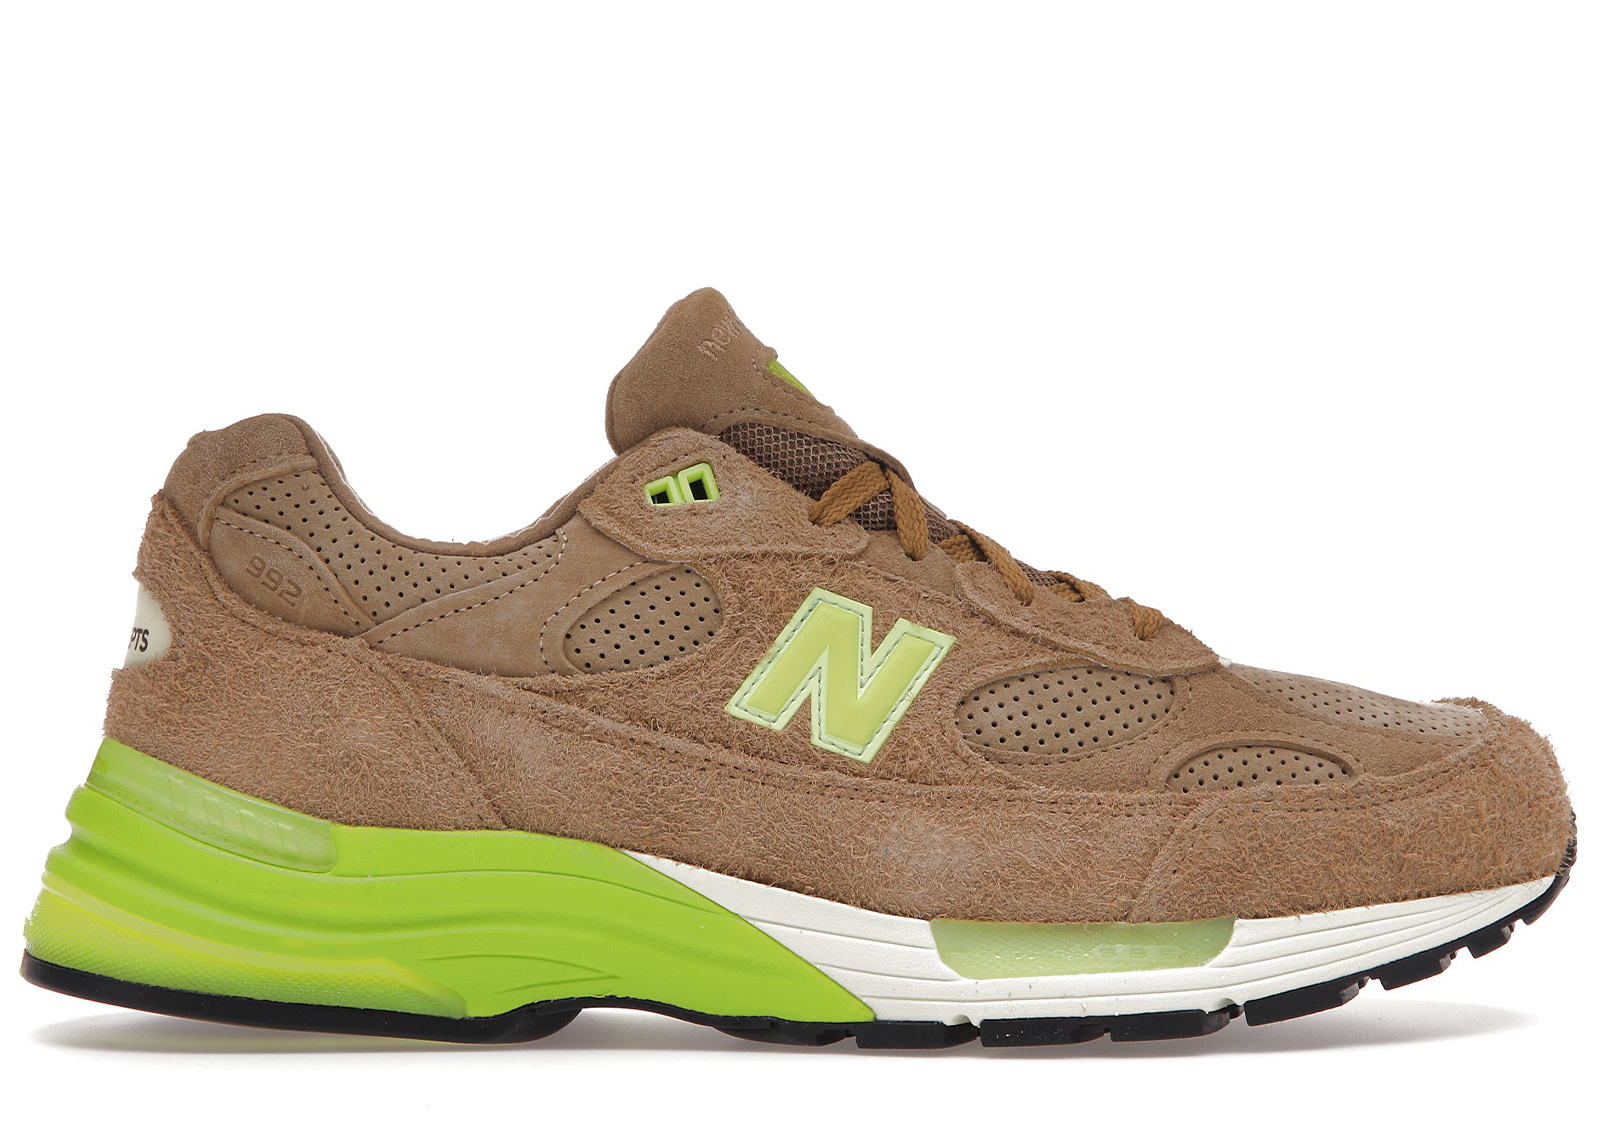 Buy New Balance 992 Shoes & New Sneakers - StockX